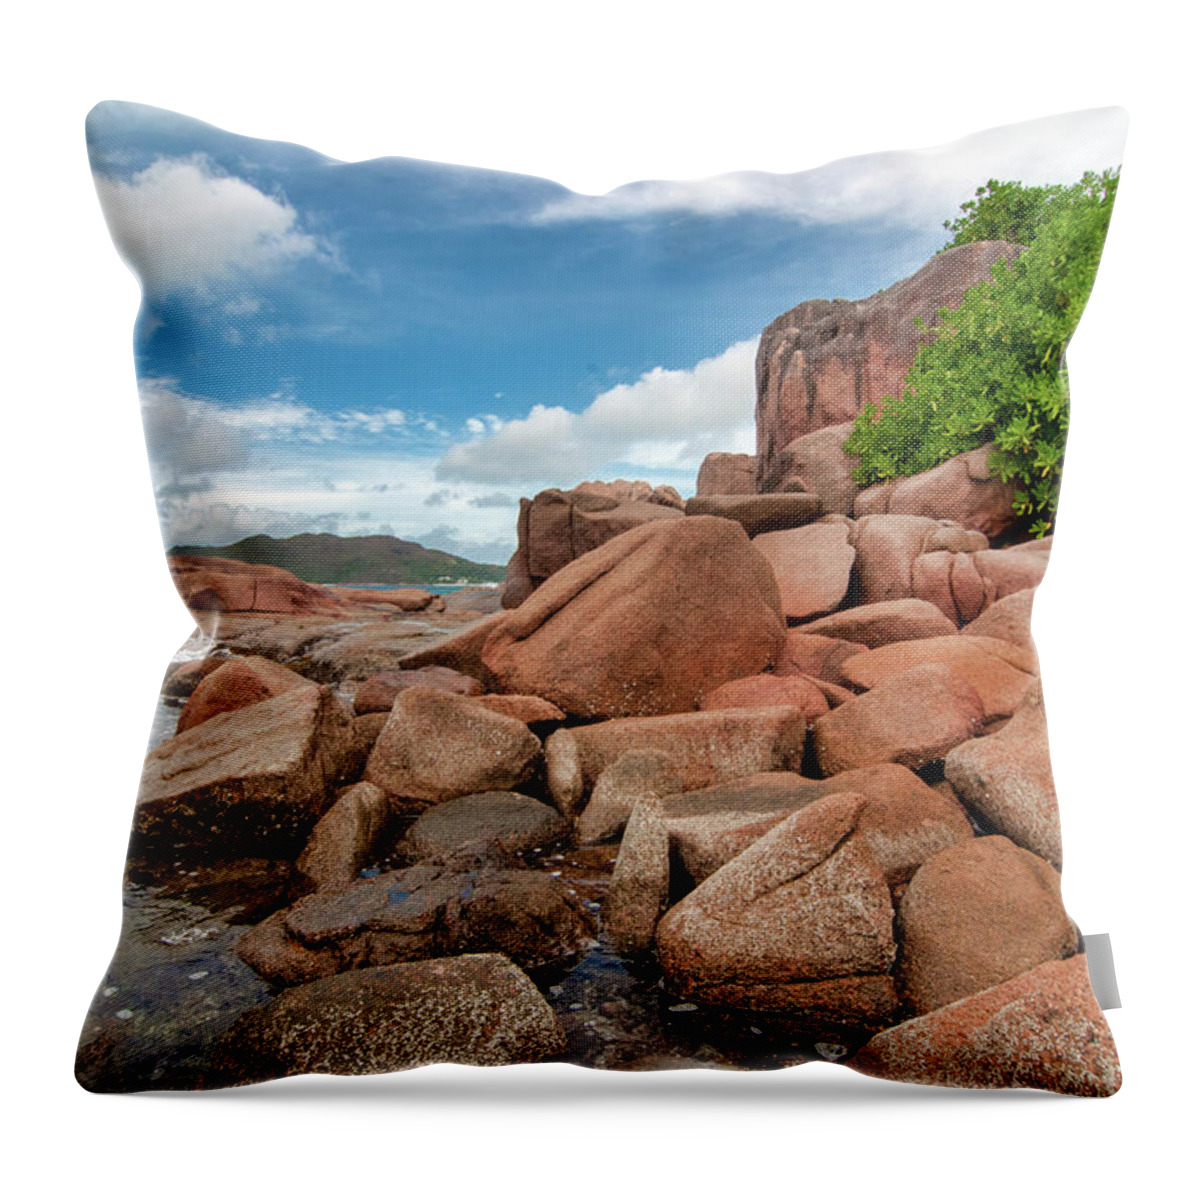 Ile Throw Pillow featuring the photograph Ile St. Pierre by Fabrizio Troiani